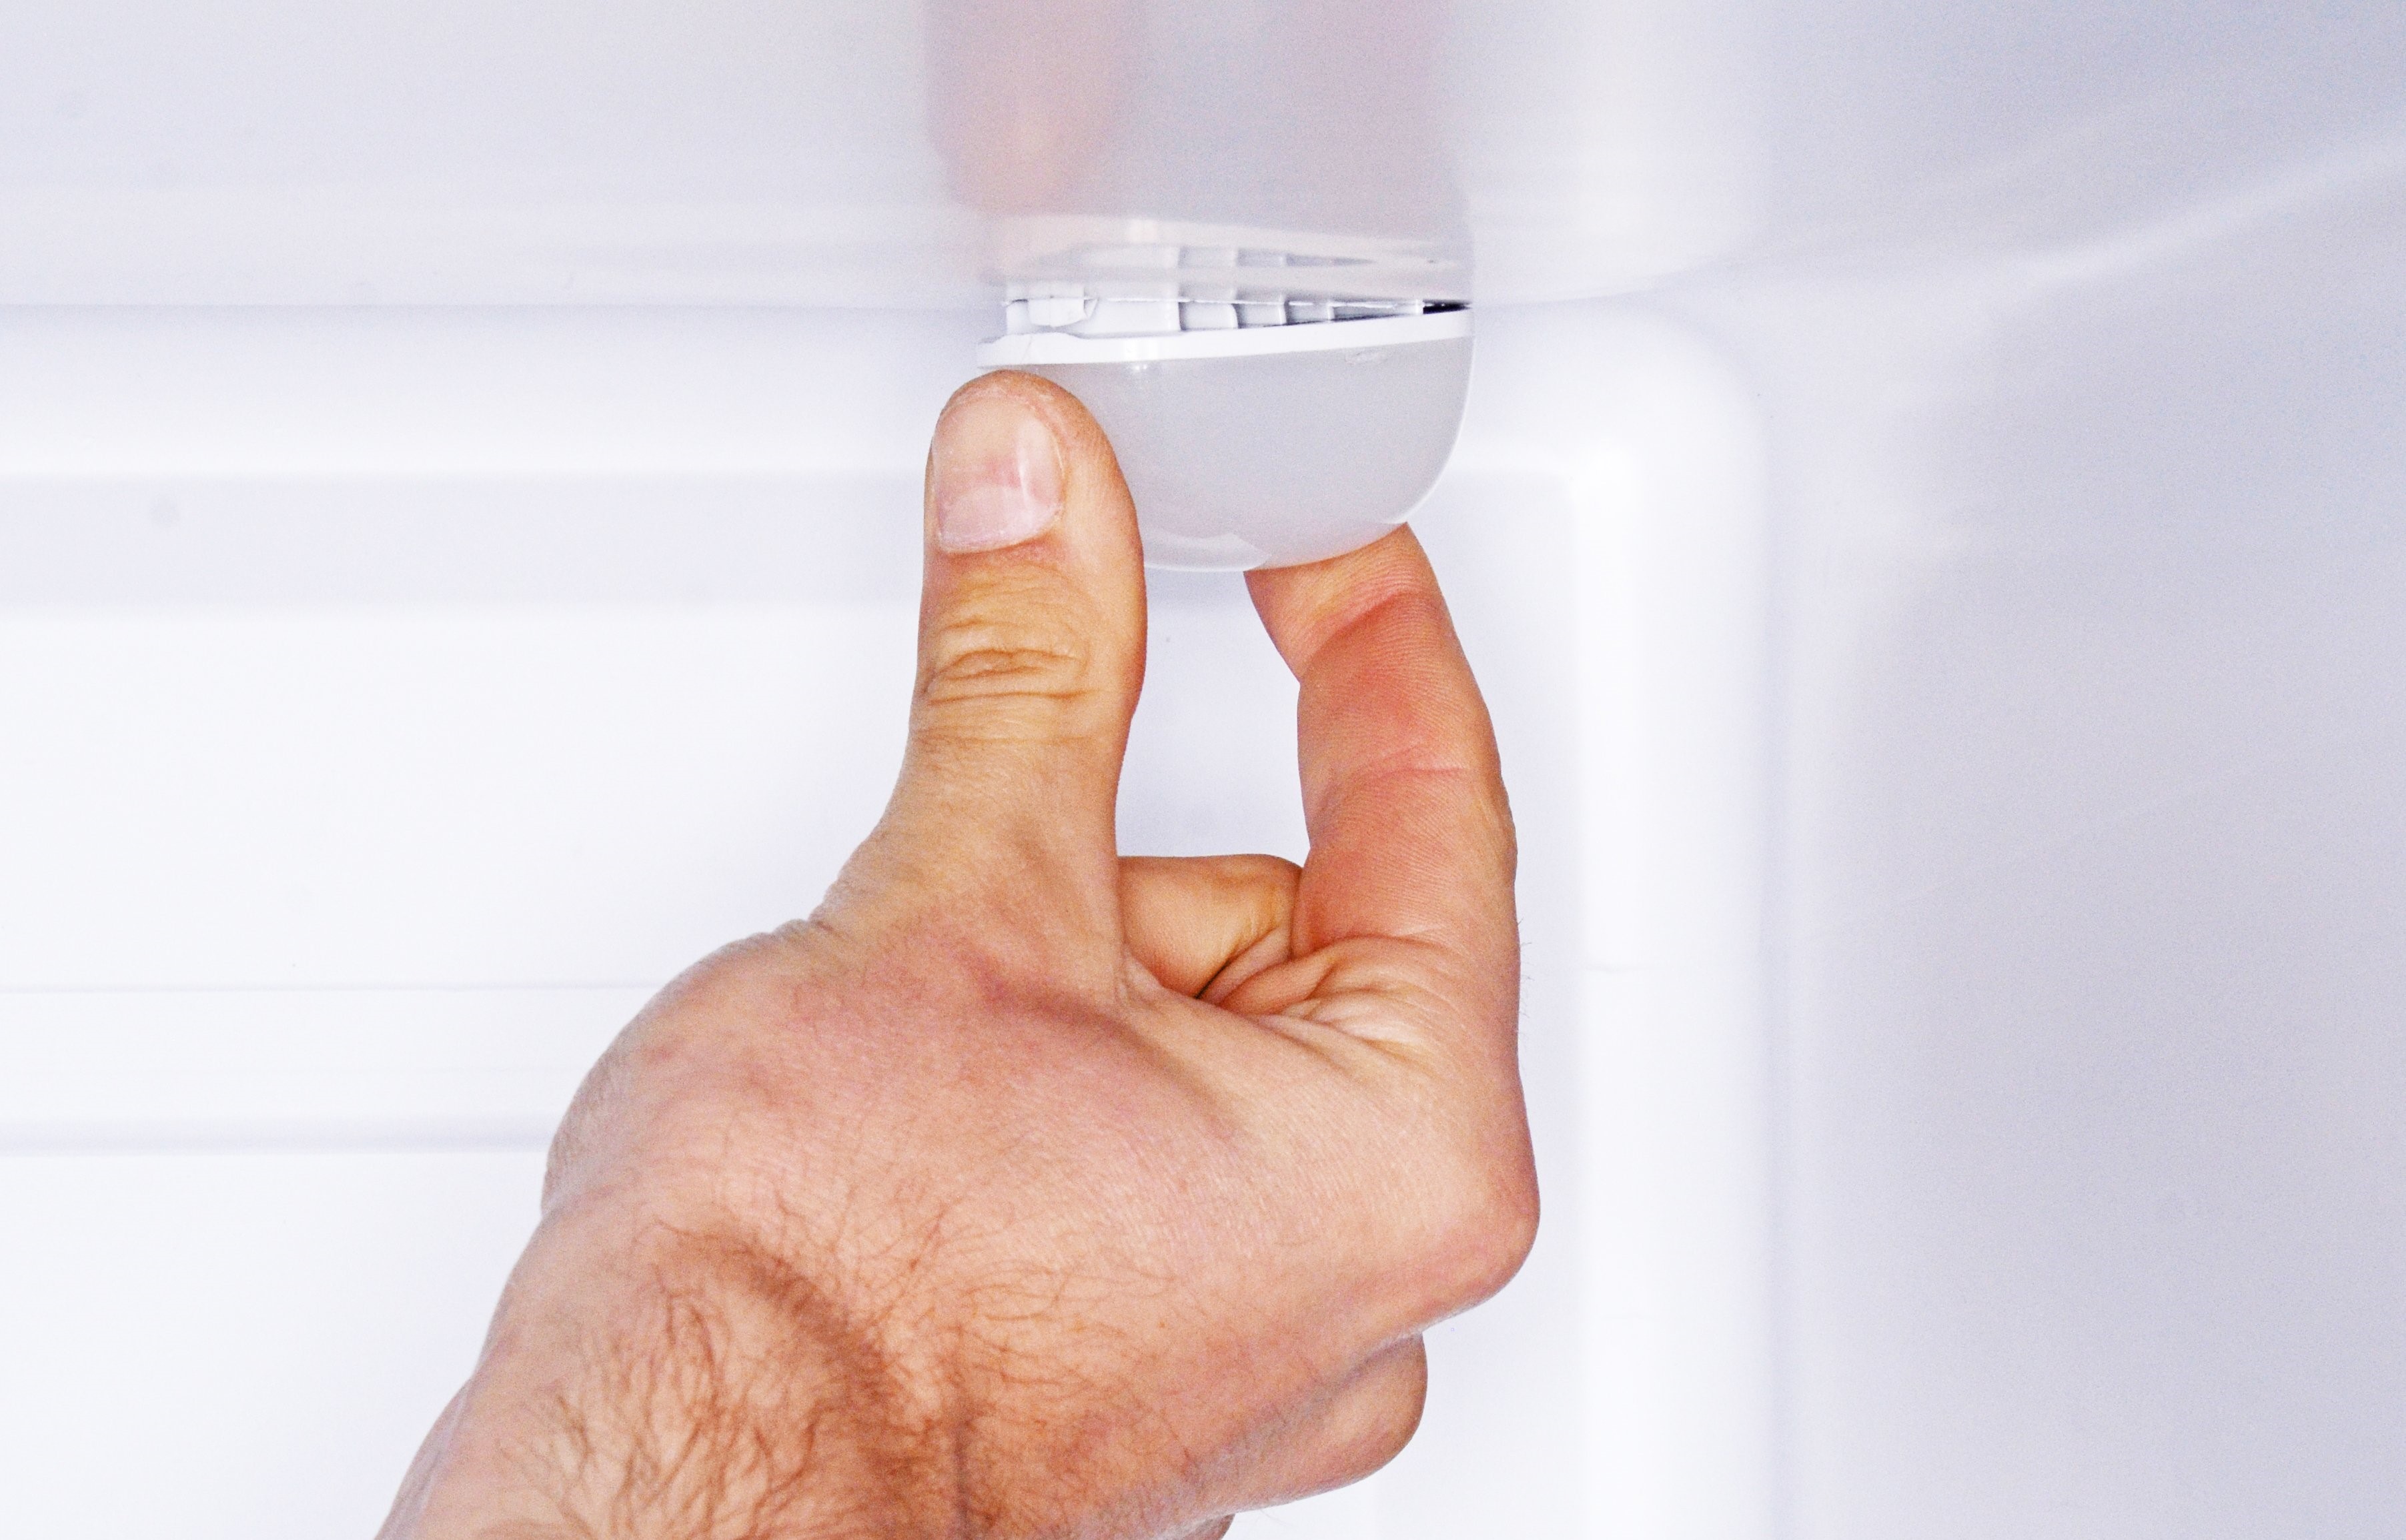 How To Remove Whirlpool Refrigerator Light Bulb Cover